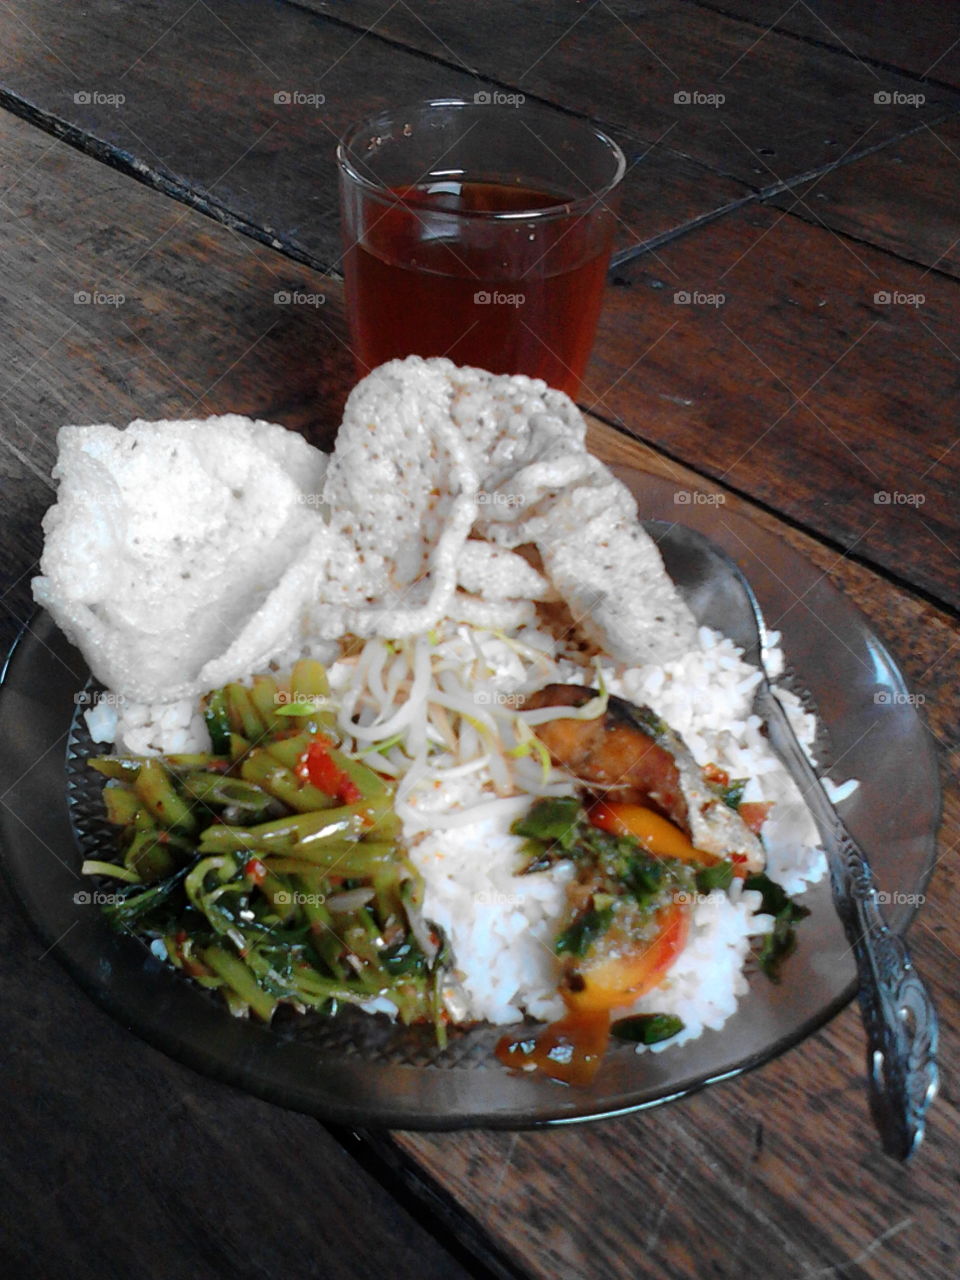 delicious lunch with indonesian food